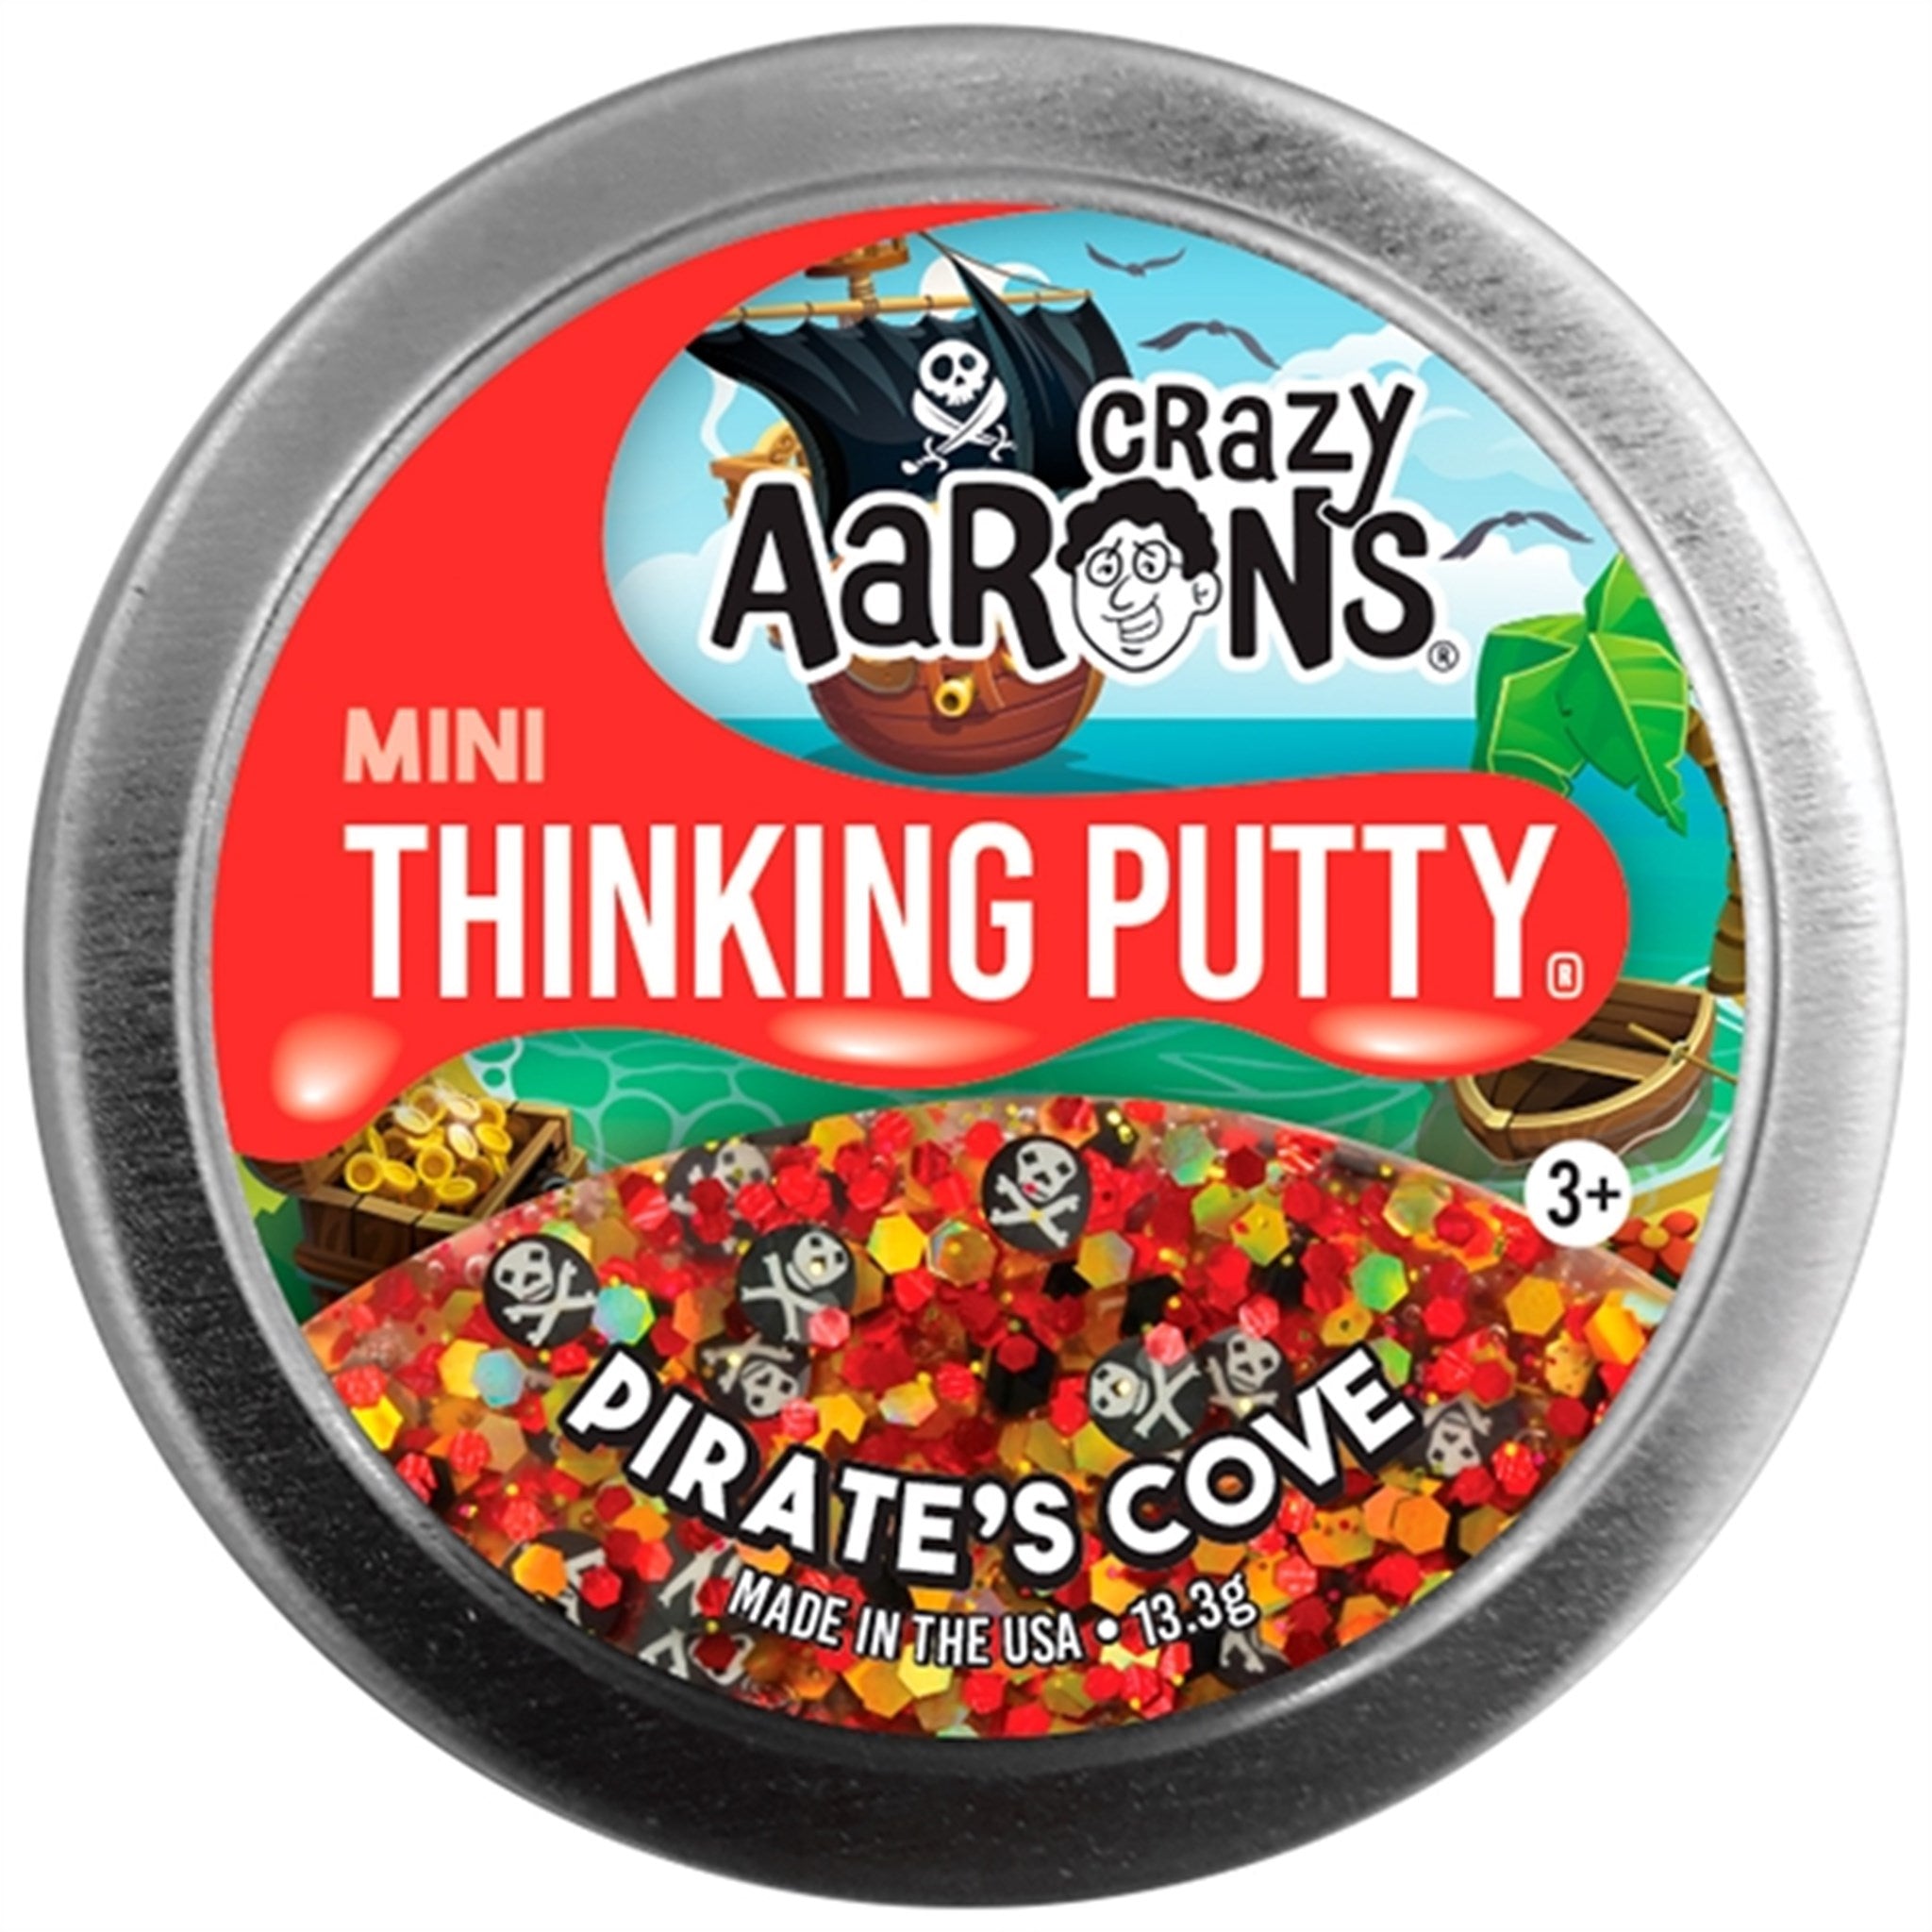 Crazy Aaron's® Thinking Putty Mini Tins - Pirate's Cove